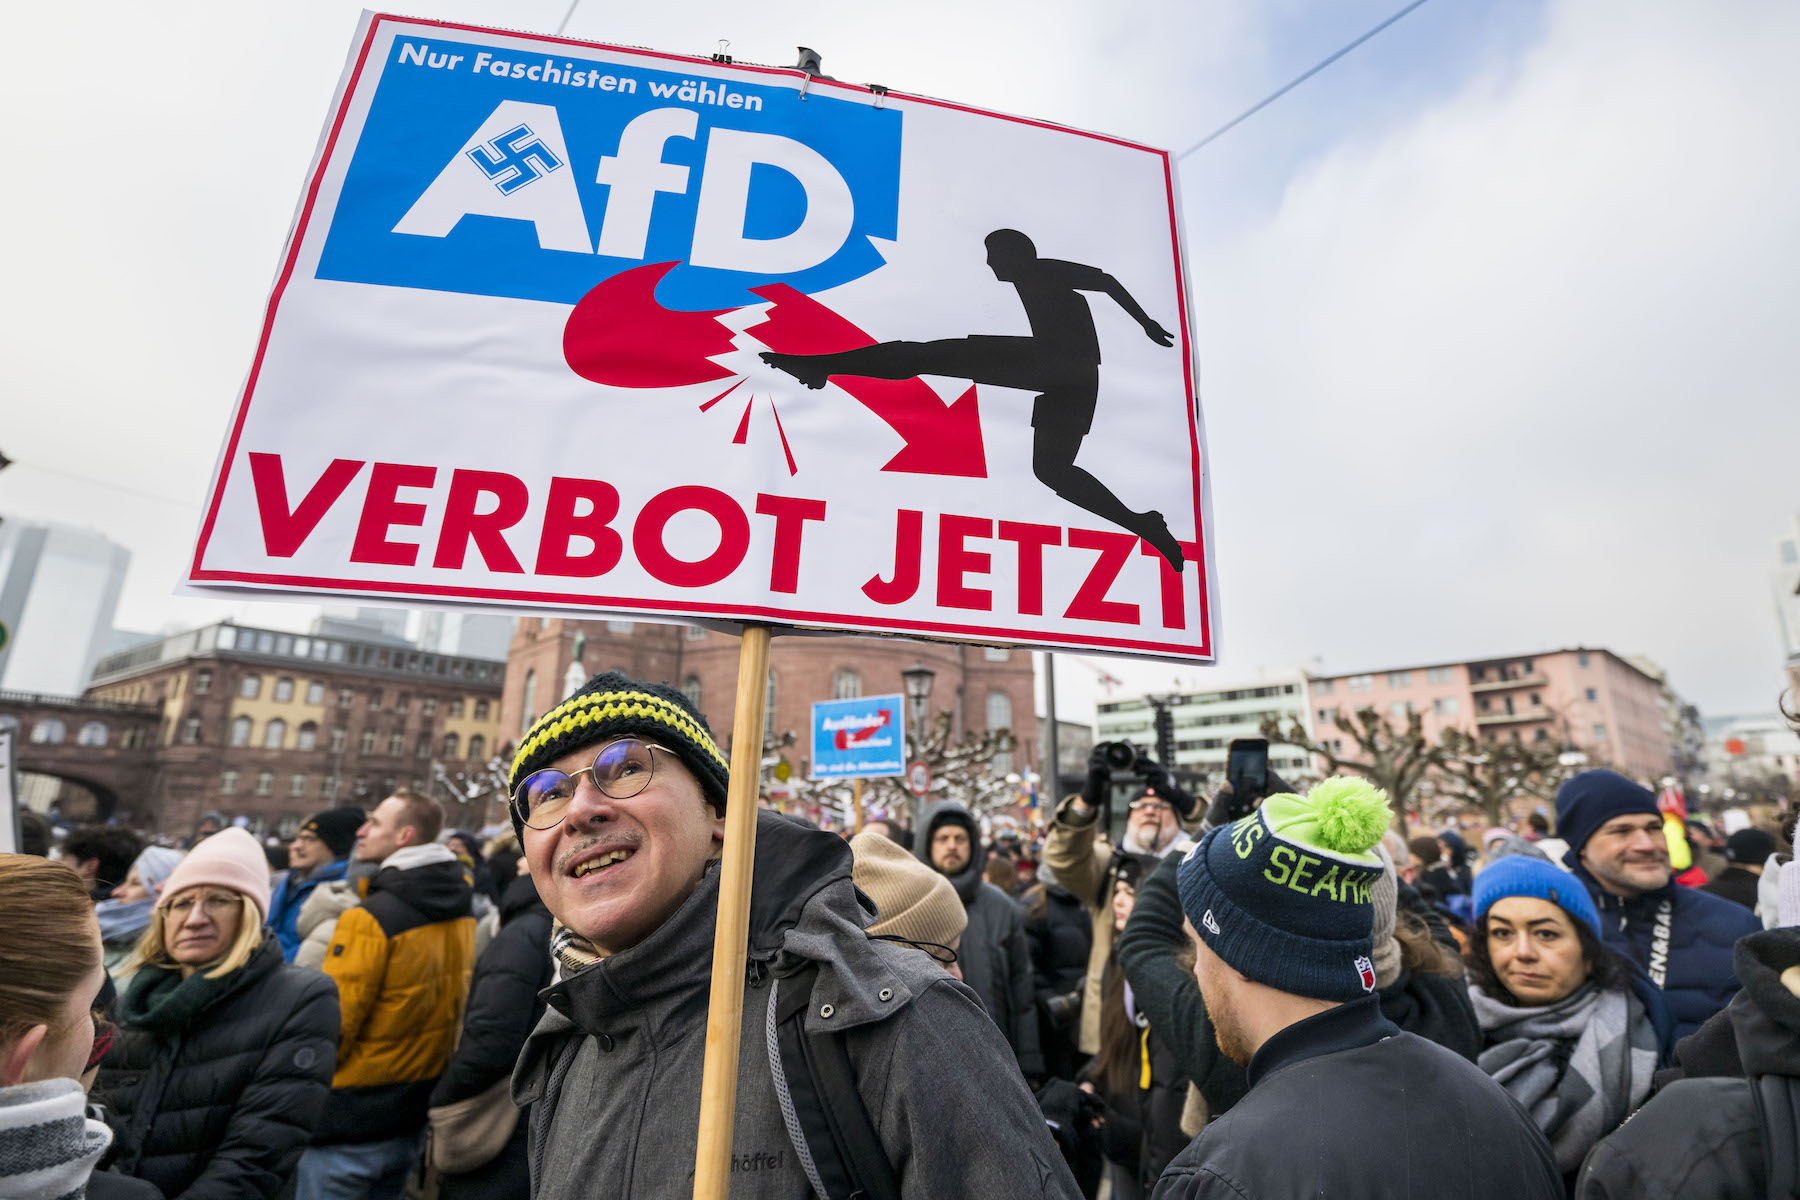 More Than 1.4 Million People In Germany Are Holding Huge Protests Against The Far-Right Party In The Country